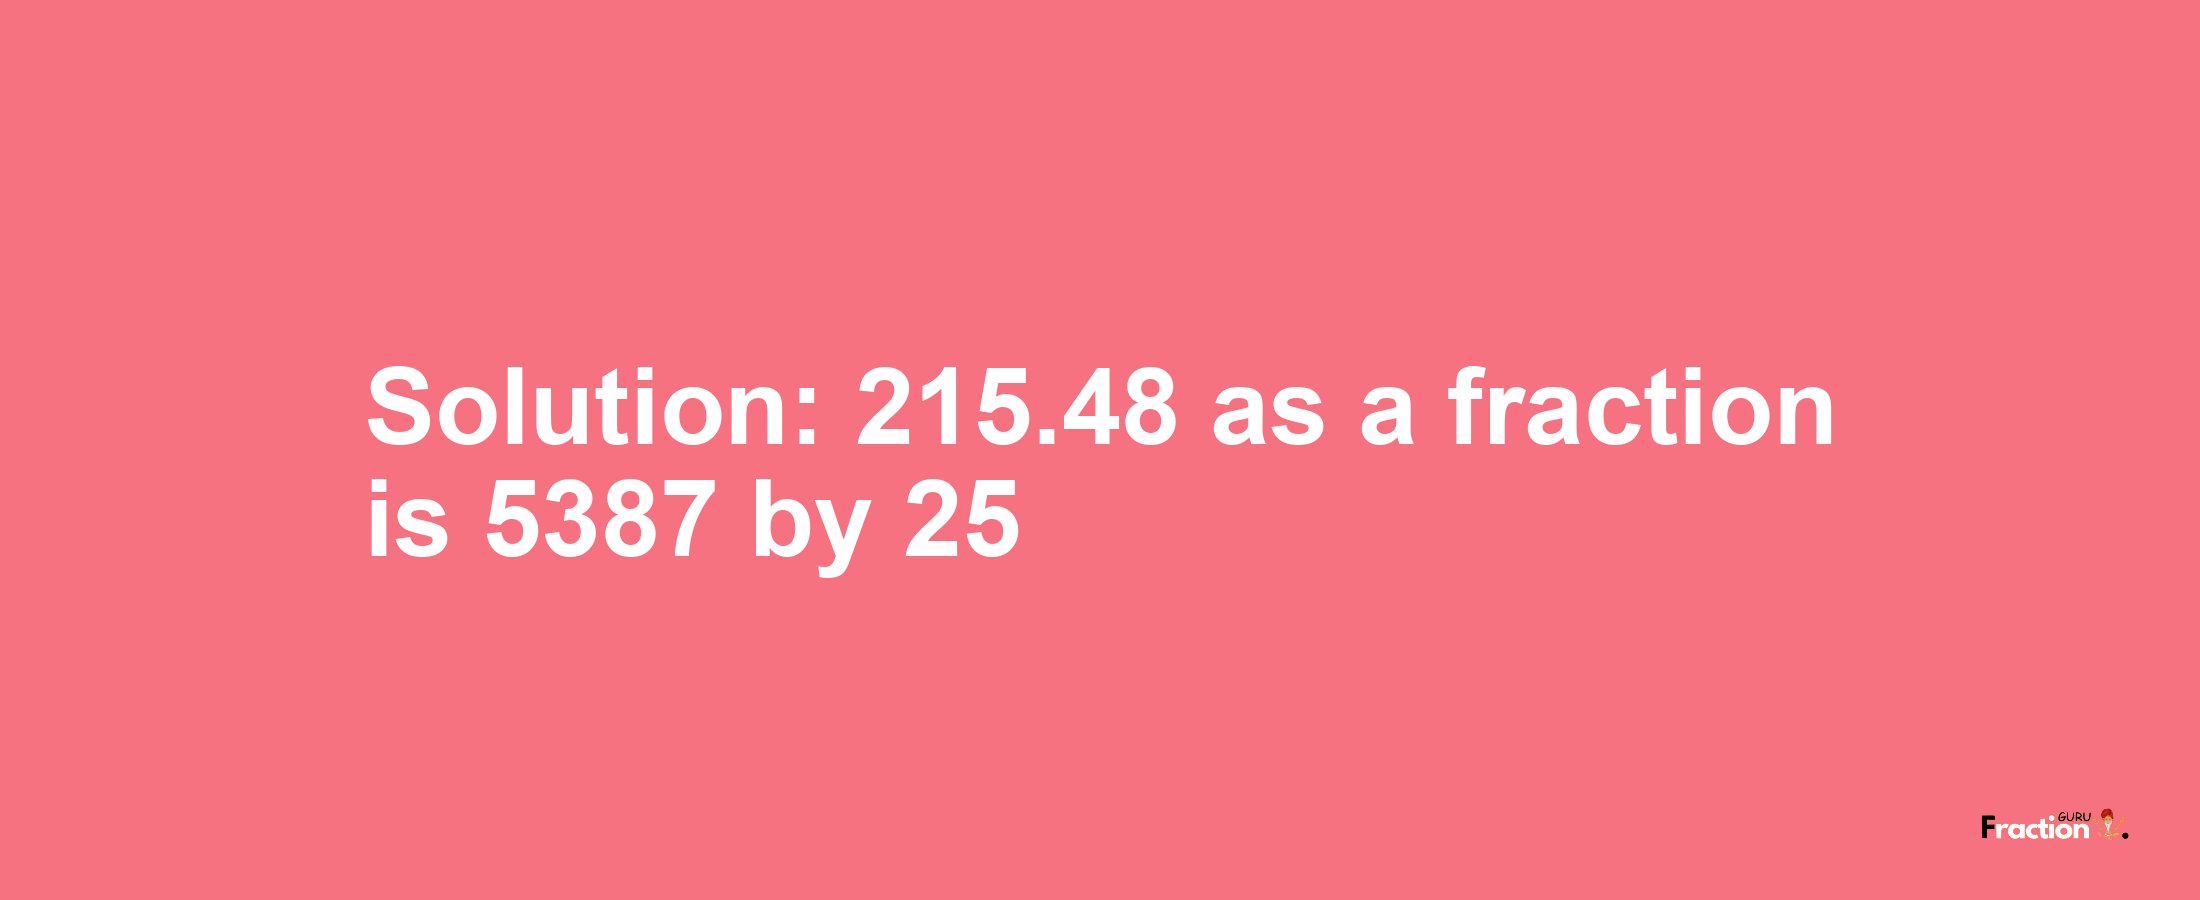 Solution:215.48 as a fraction is 5387/25